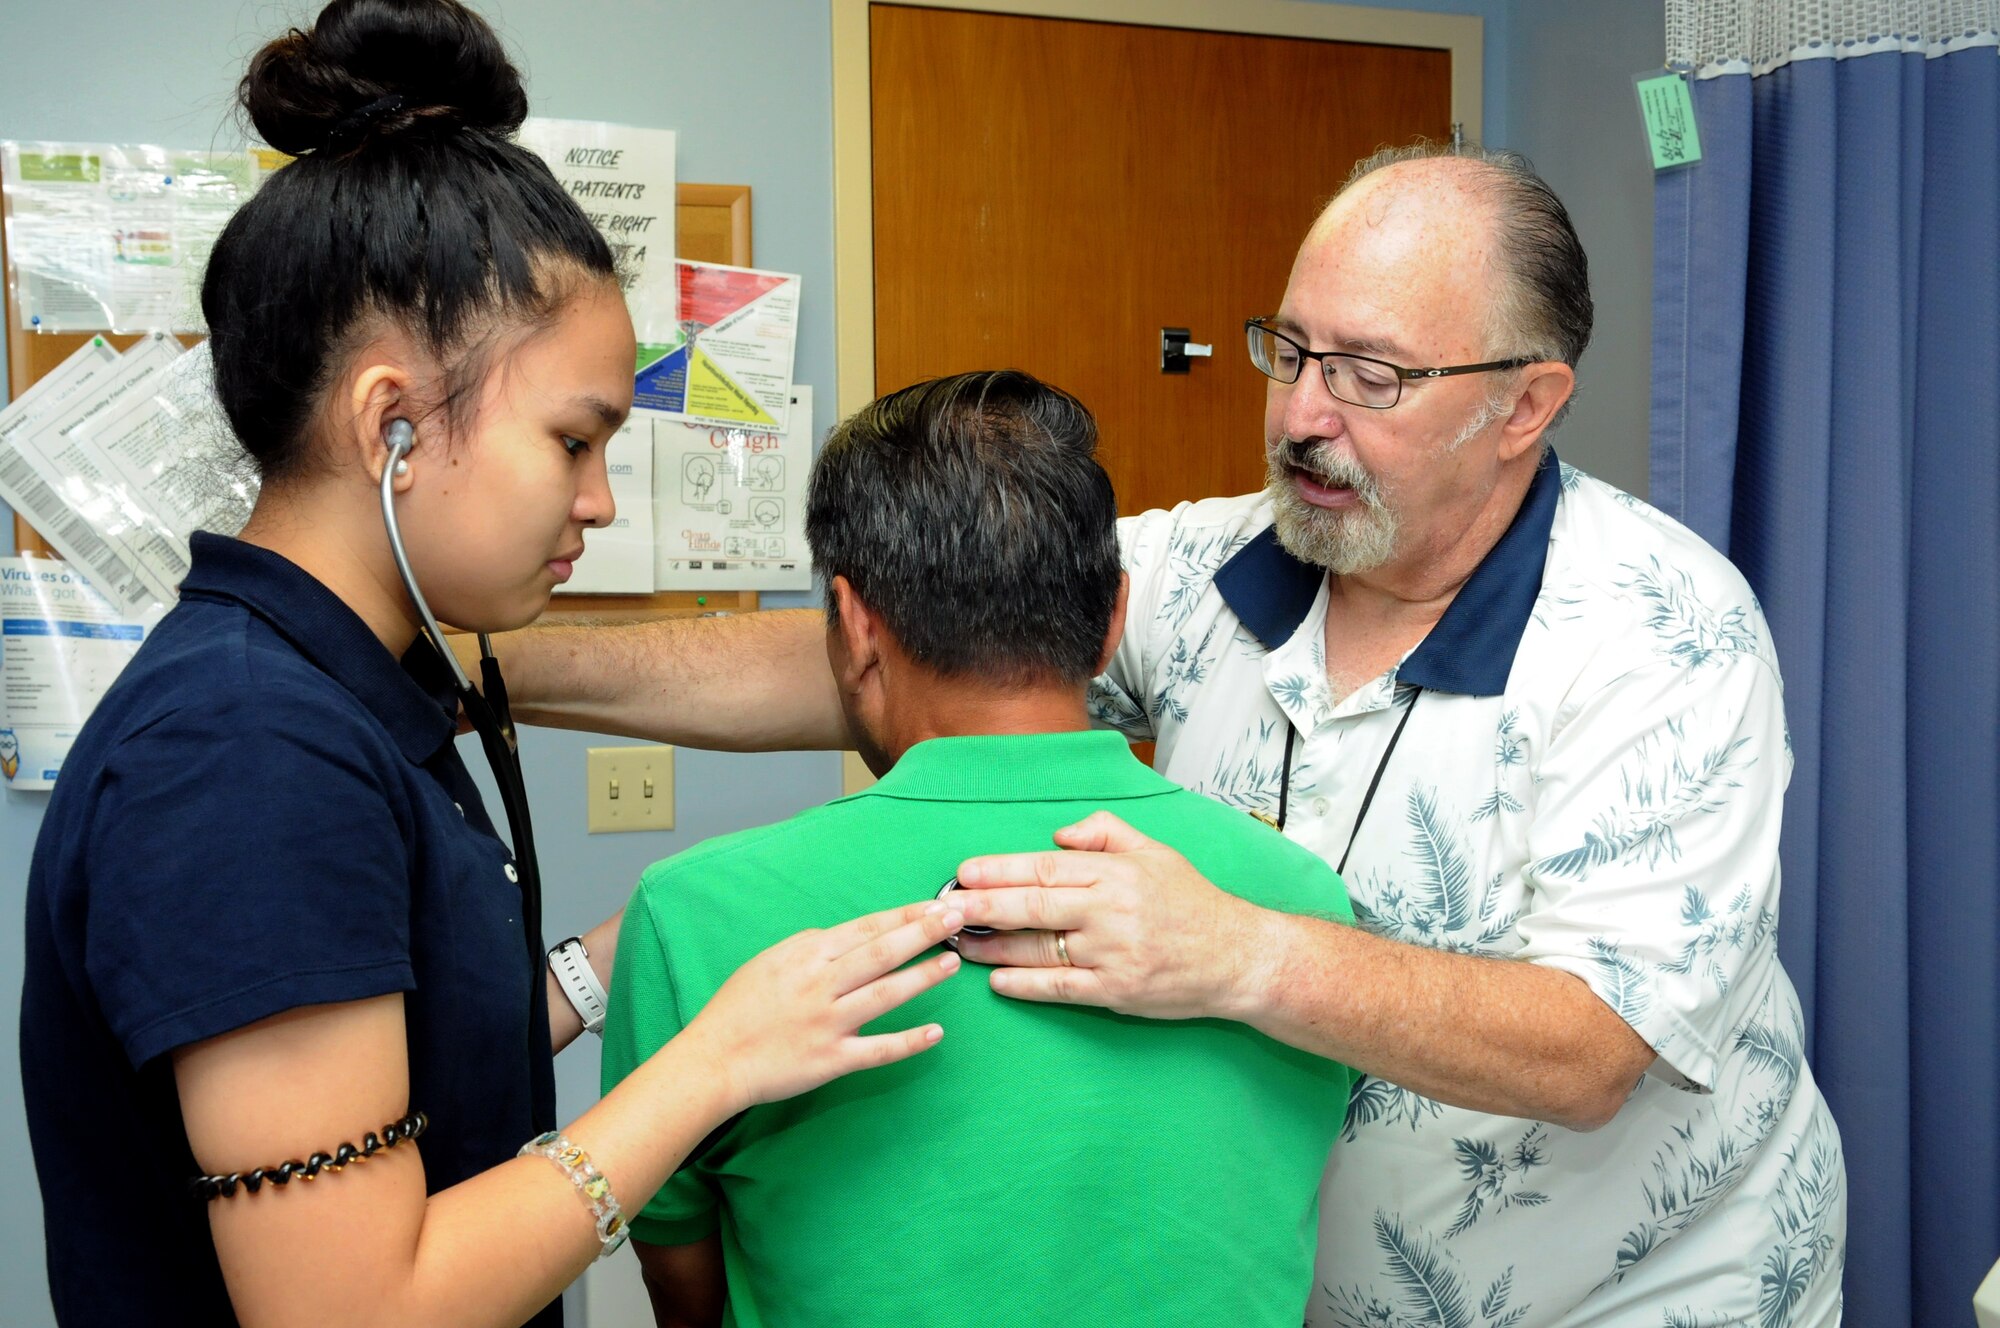 Queenie Ofiaza, a student from Radford High School, assists Dr. John L. Bossian, a staff physician with the 15th Medical Operations Squadron, in checking a patient during Career Shadow Day at the 15th Medical Group, Joint Base Pearl Harbor-Hickam, Hawaii, March 28, 2018.